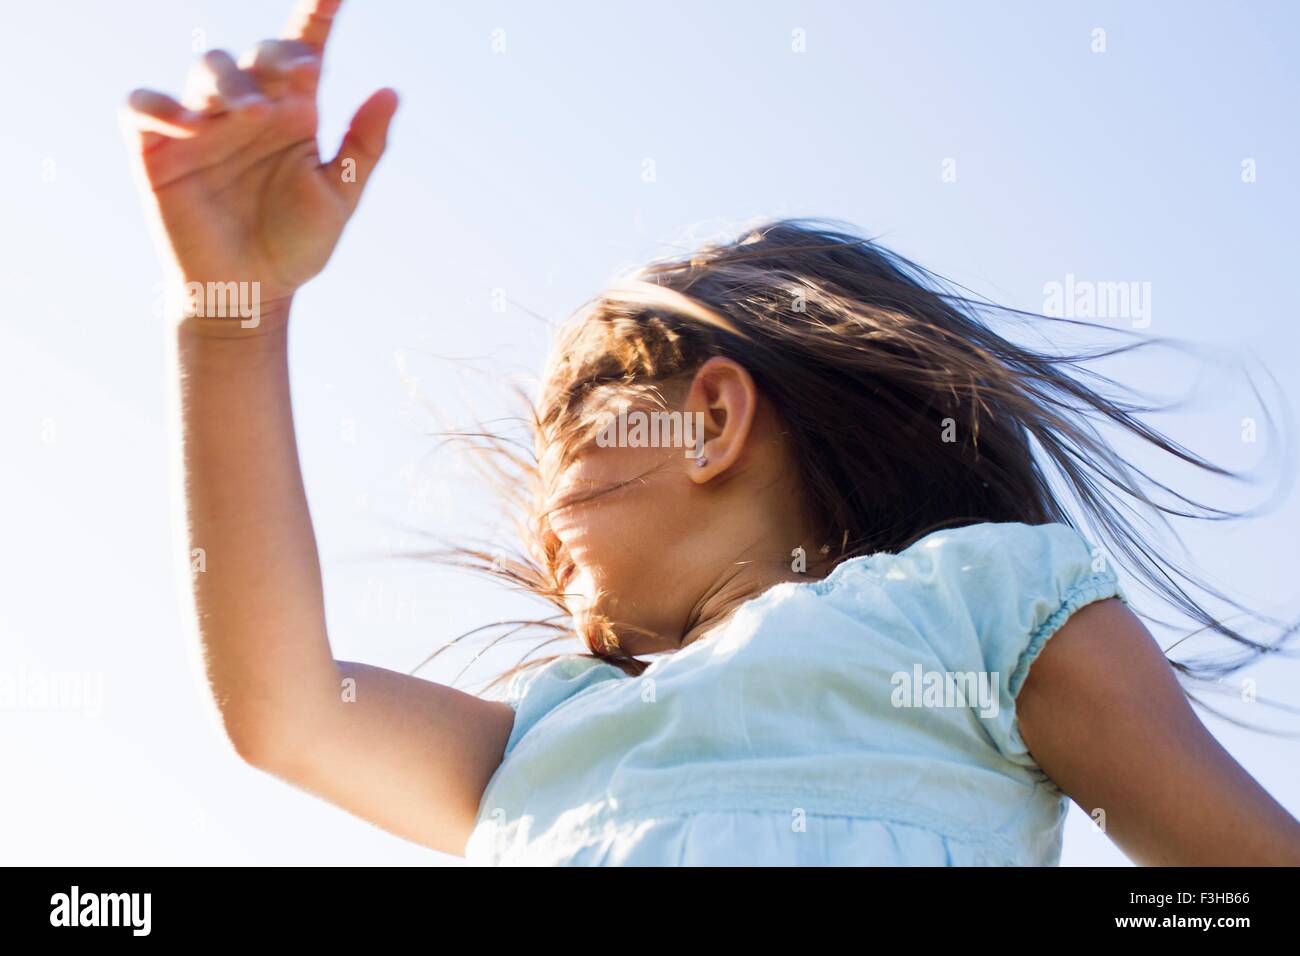 Low angle view of girl spinning around against blue sky Stock Photo